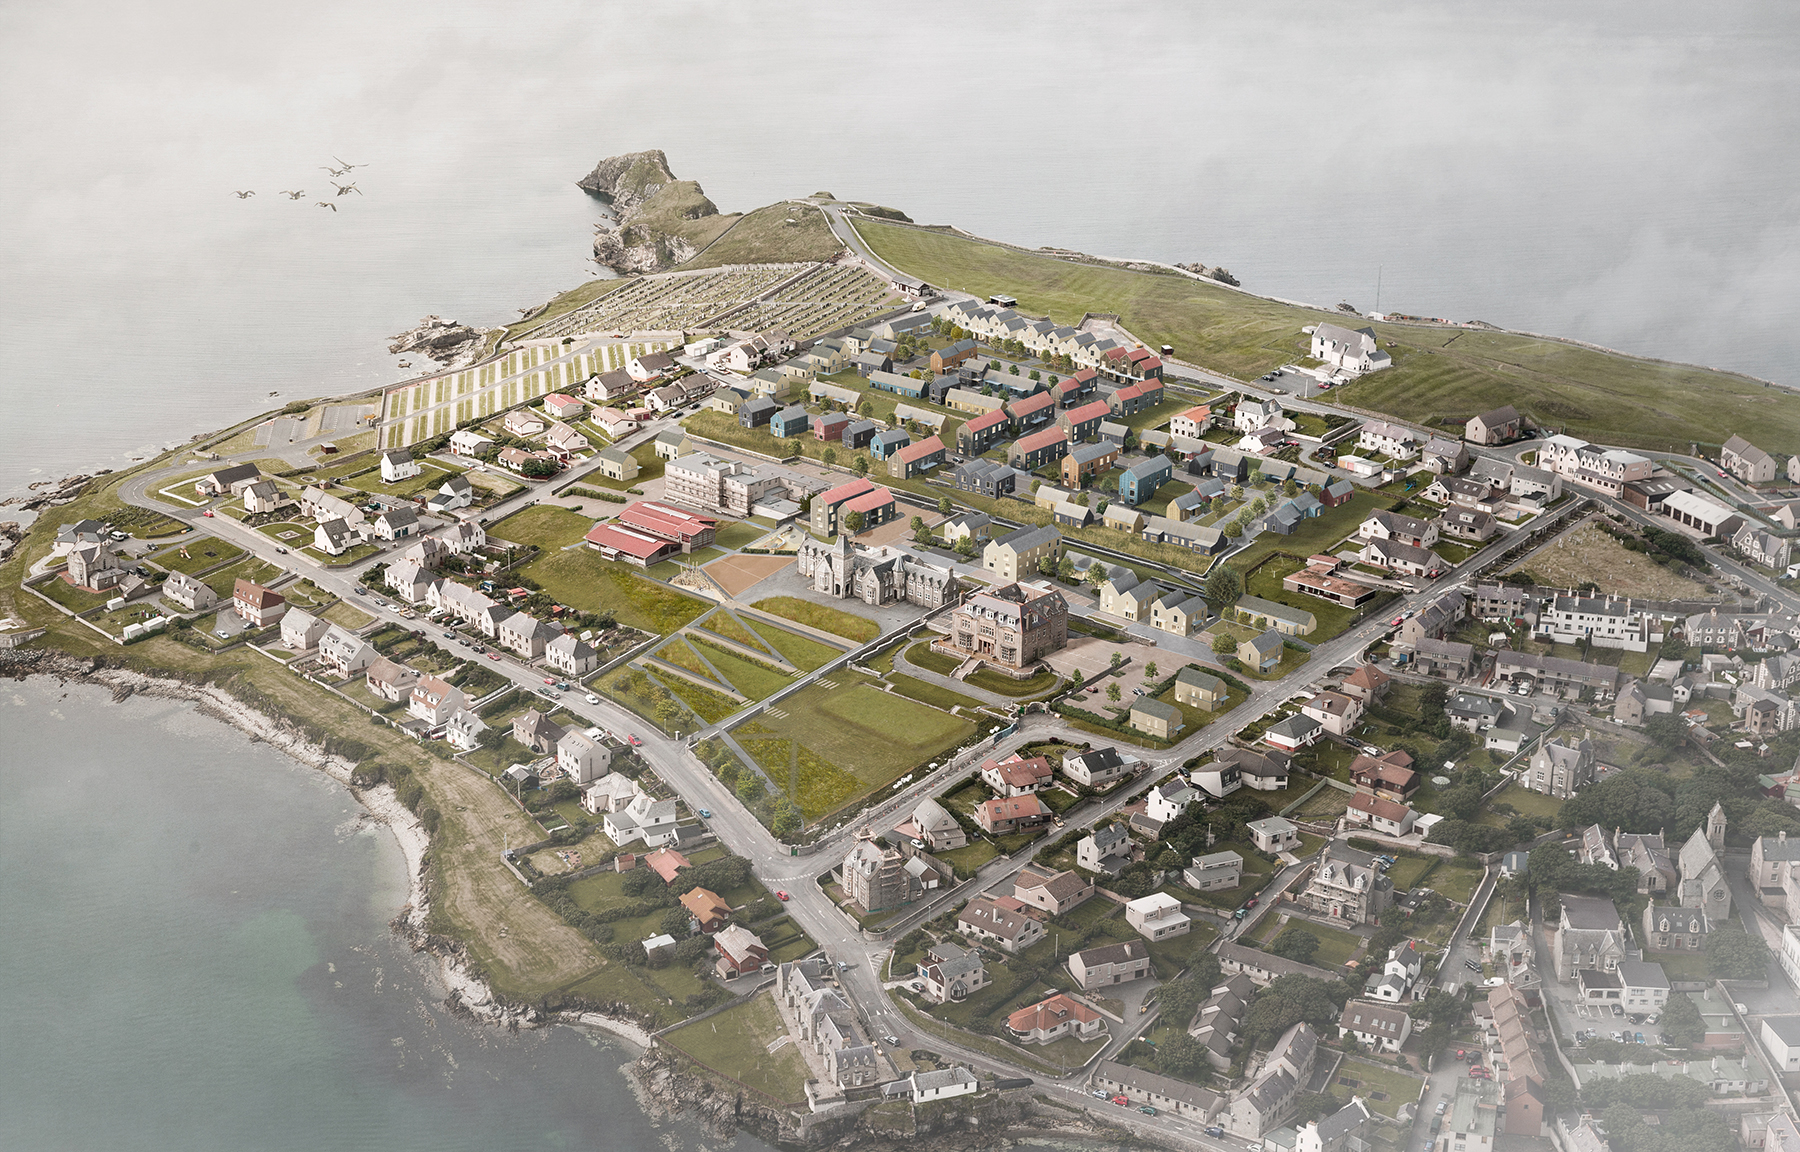 Council to consult on Lerwick masterplan